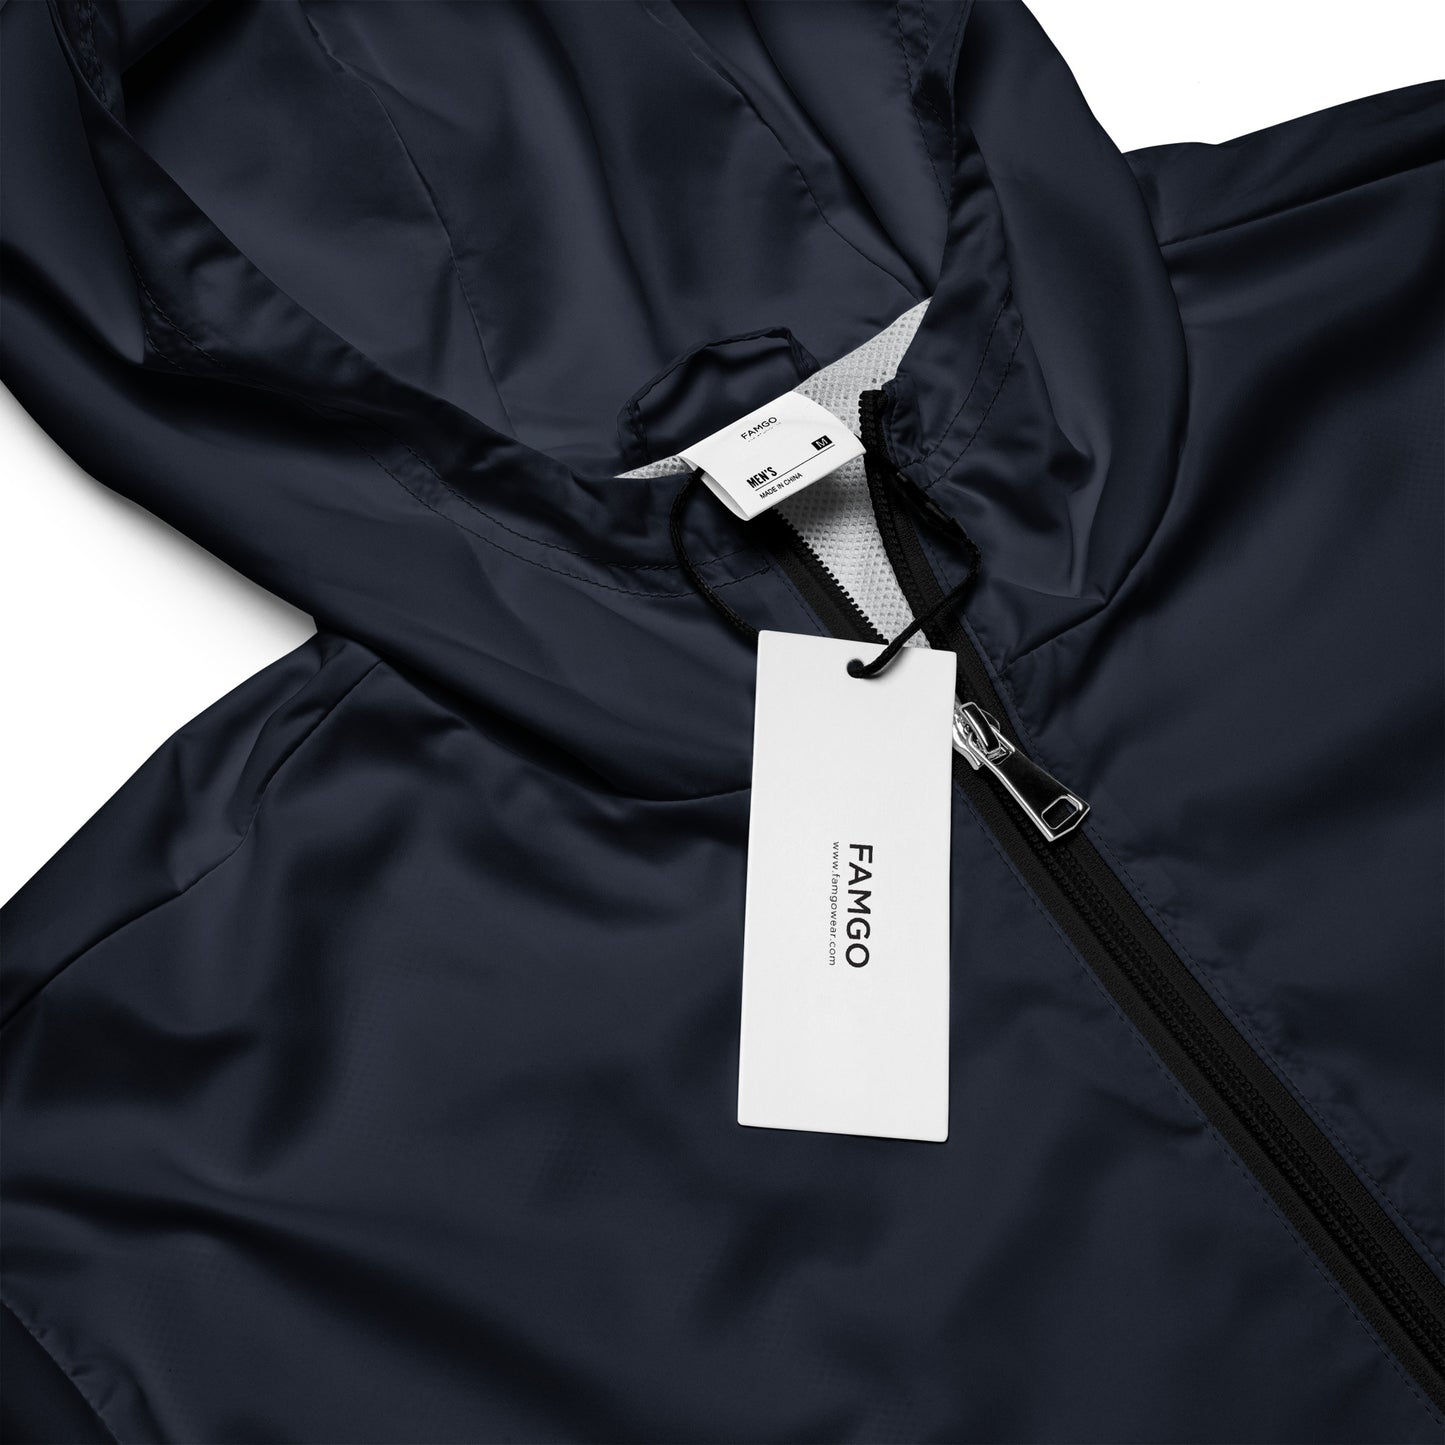 Close-up of the "Be Still" inspirational quote water-resistant windbreaker jacket with FAMGO label